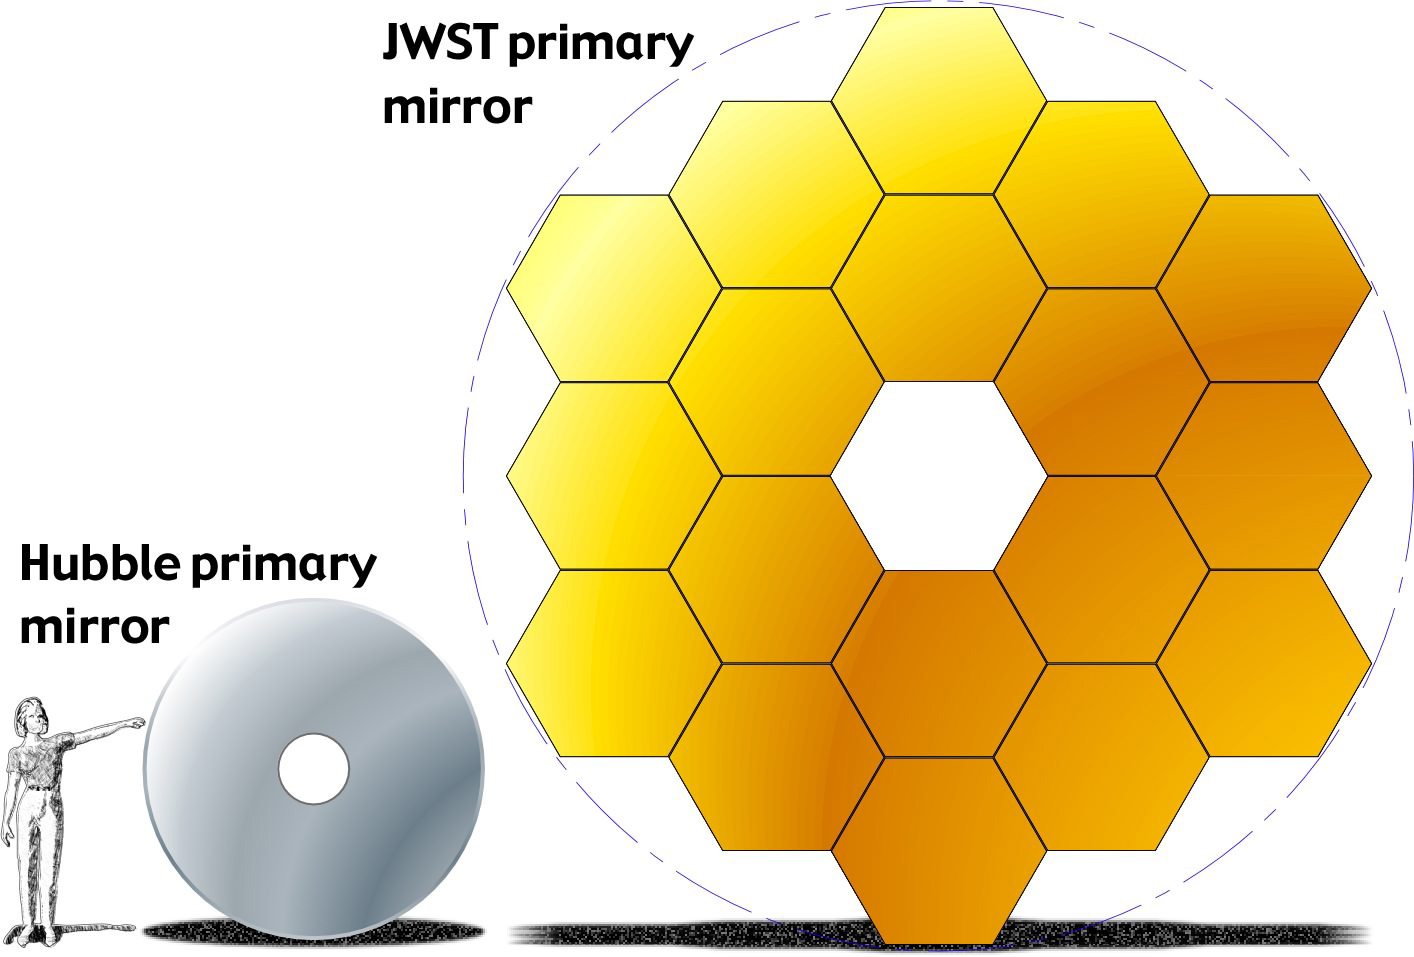 Comparison of JWST and HST mirrors